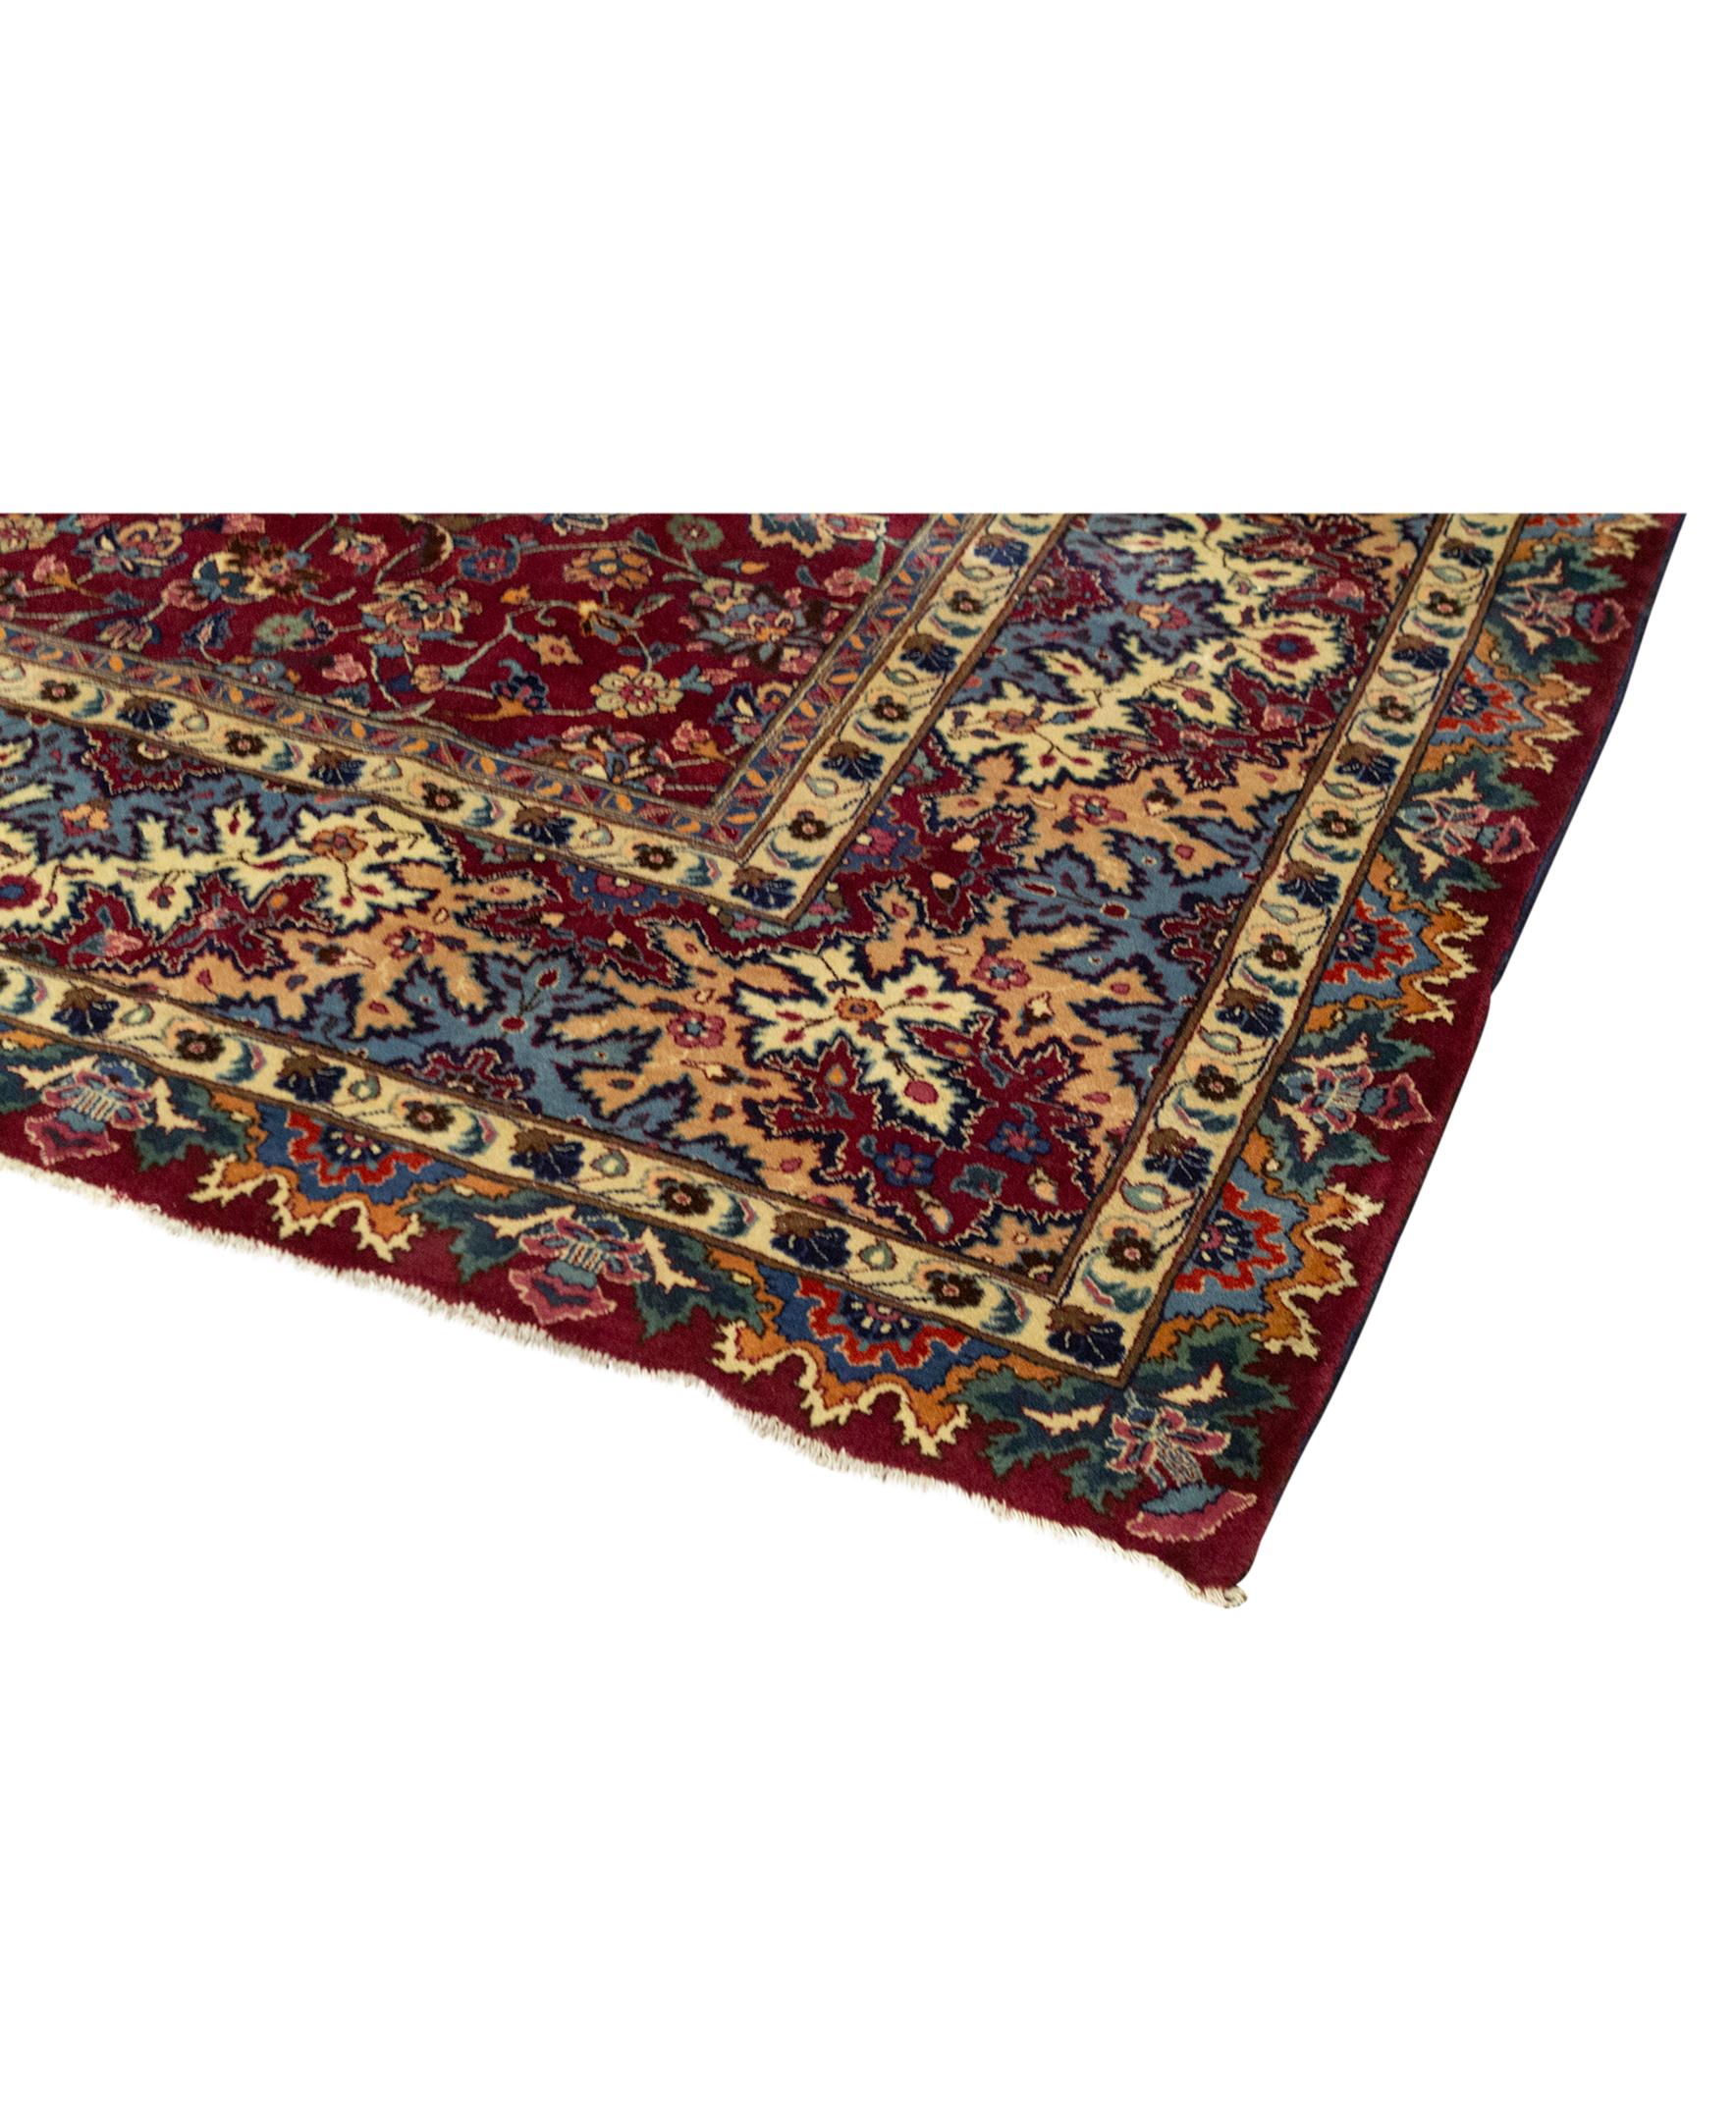 Other Antique Persian fine Traditional Handwoven Luxury Wool Red / Blue Rug For Sale